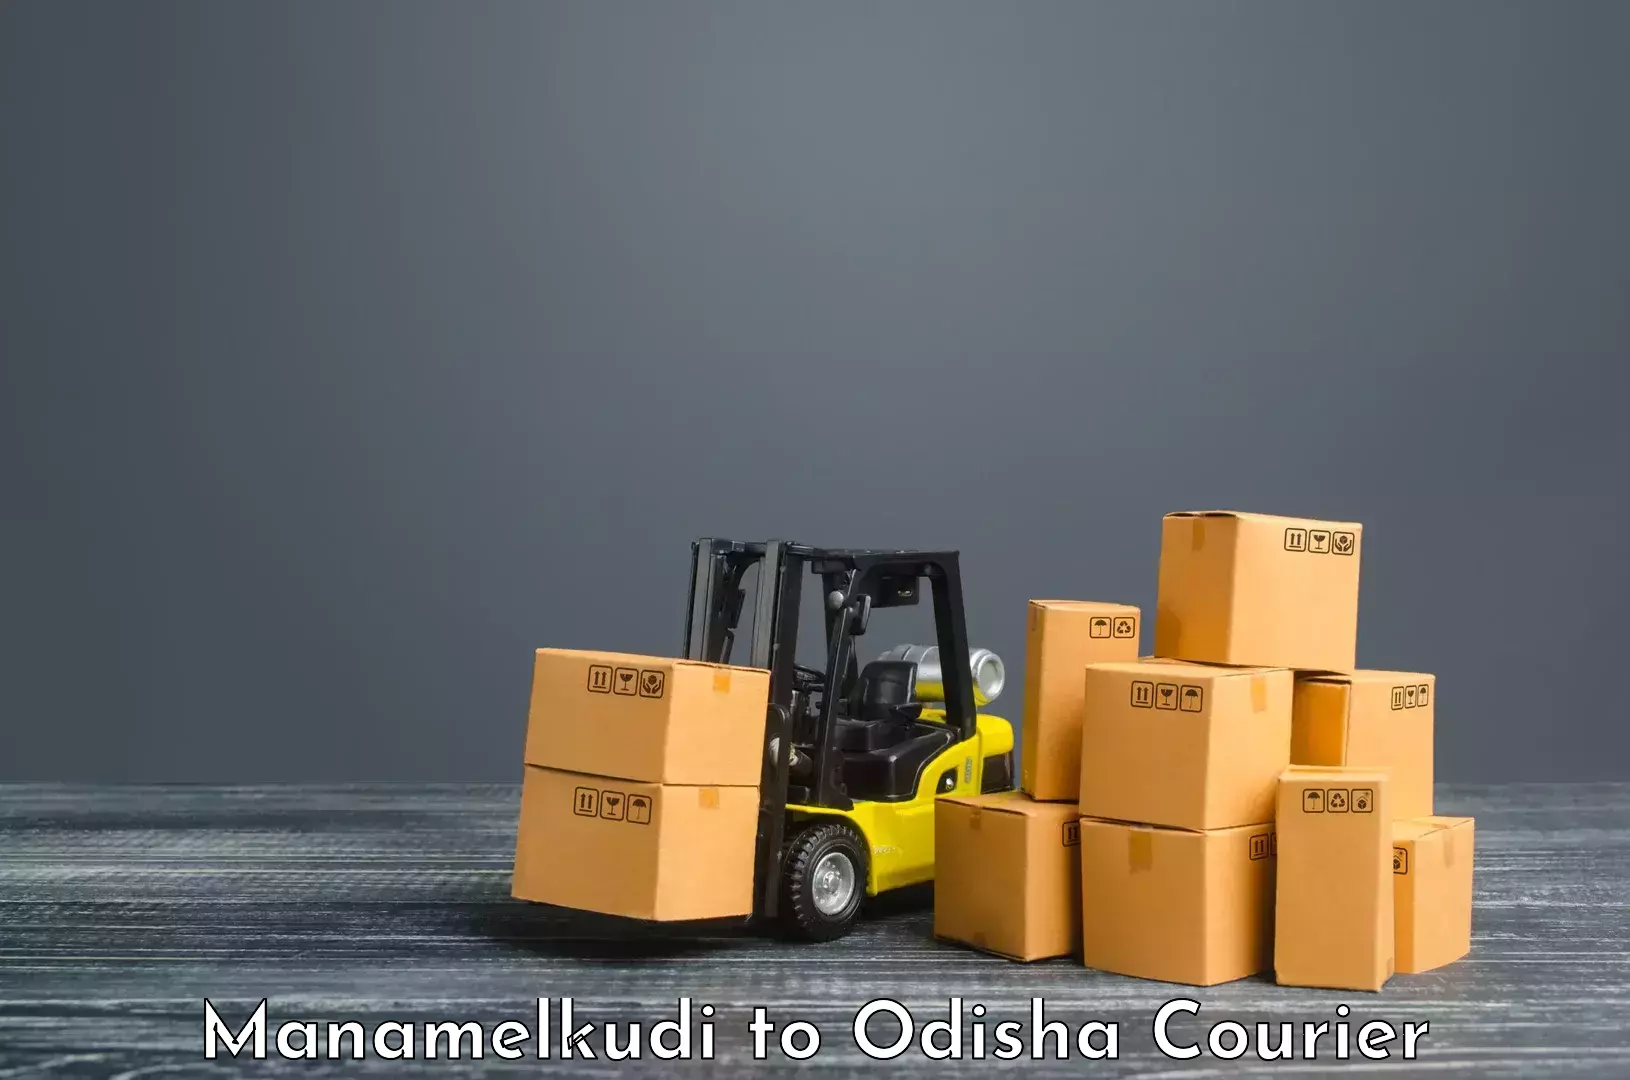 Same-day delivery solutions Manamelkudi to Loisingha